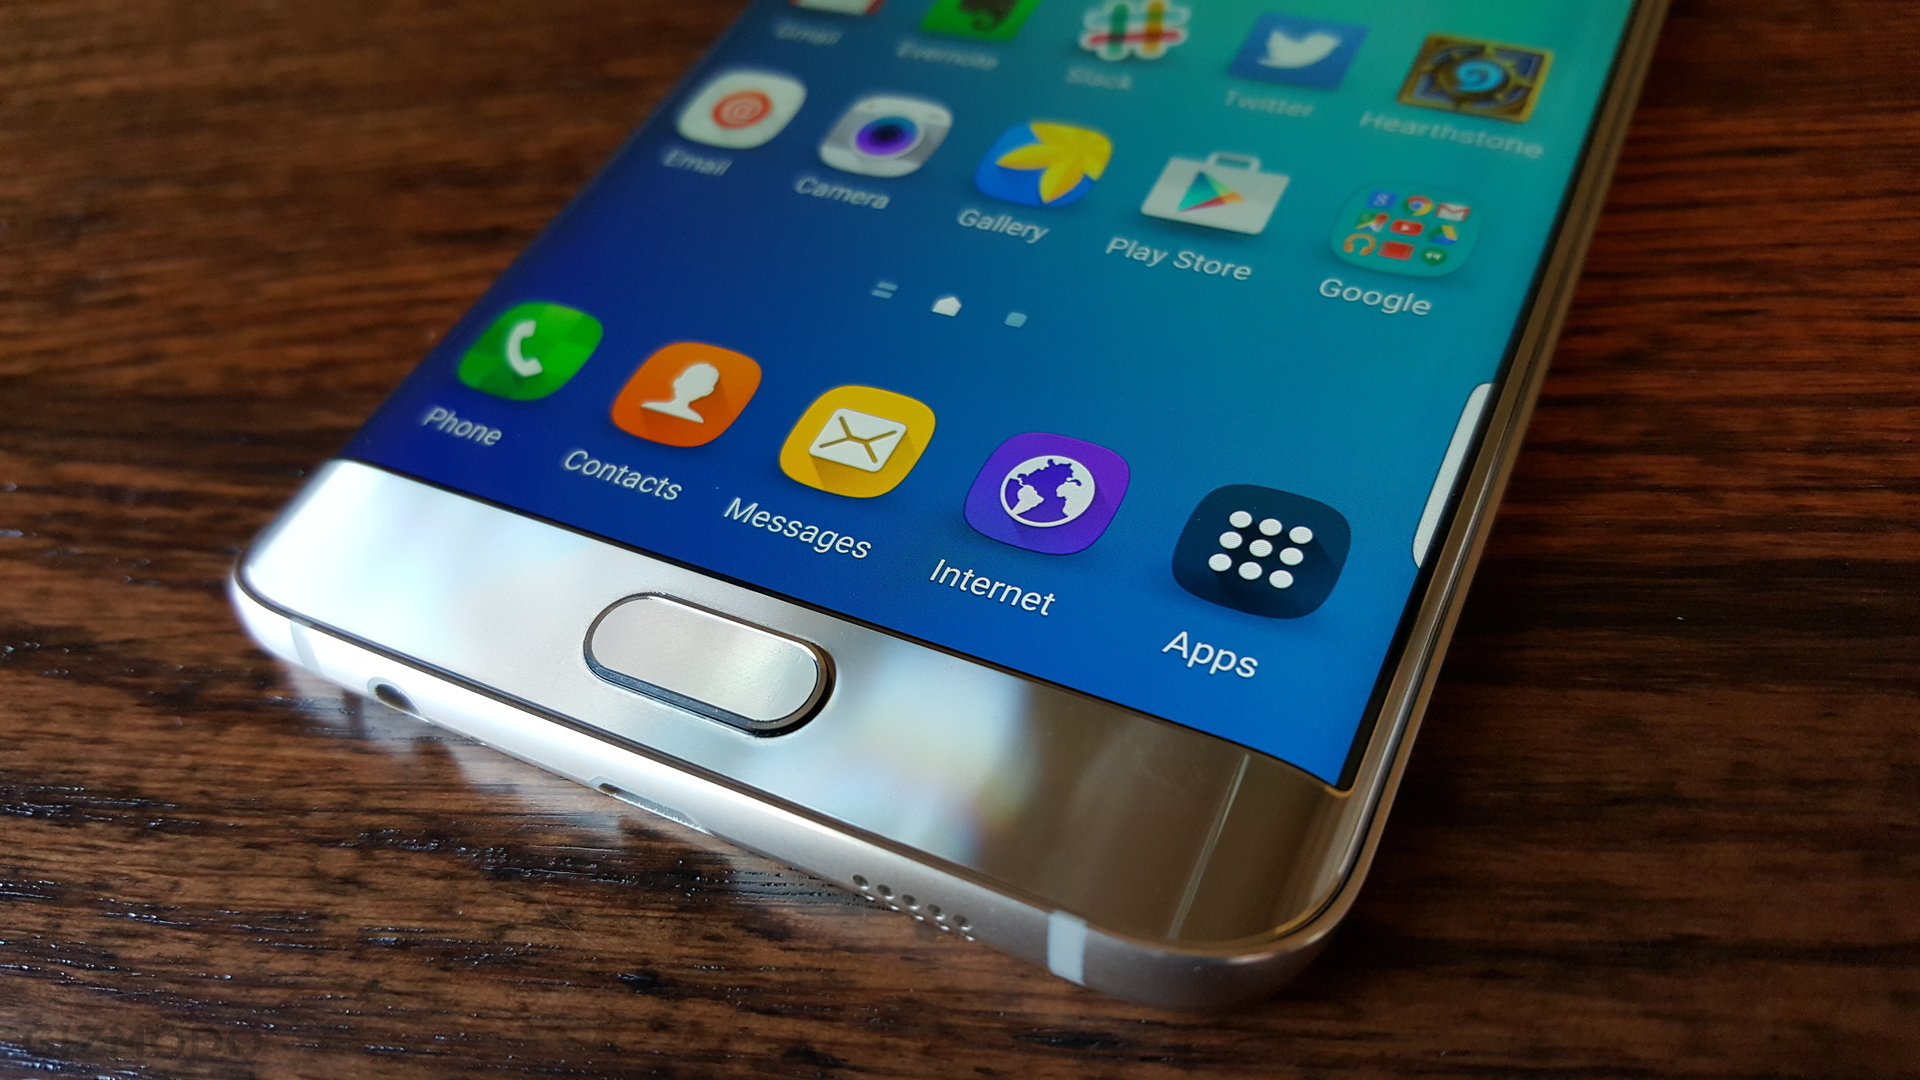 Samsung Galaxy S6 Edge+ Review: Buy It For Bragging Rights